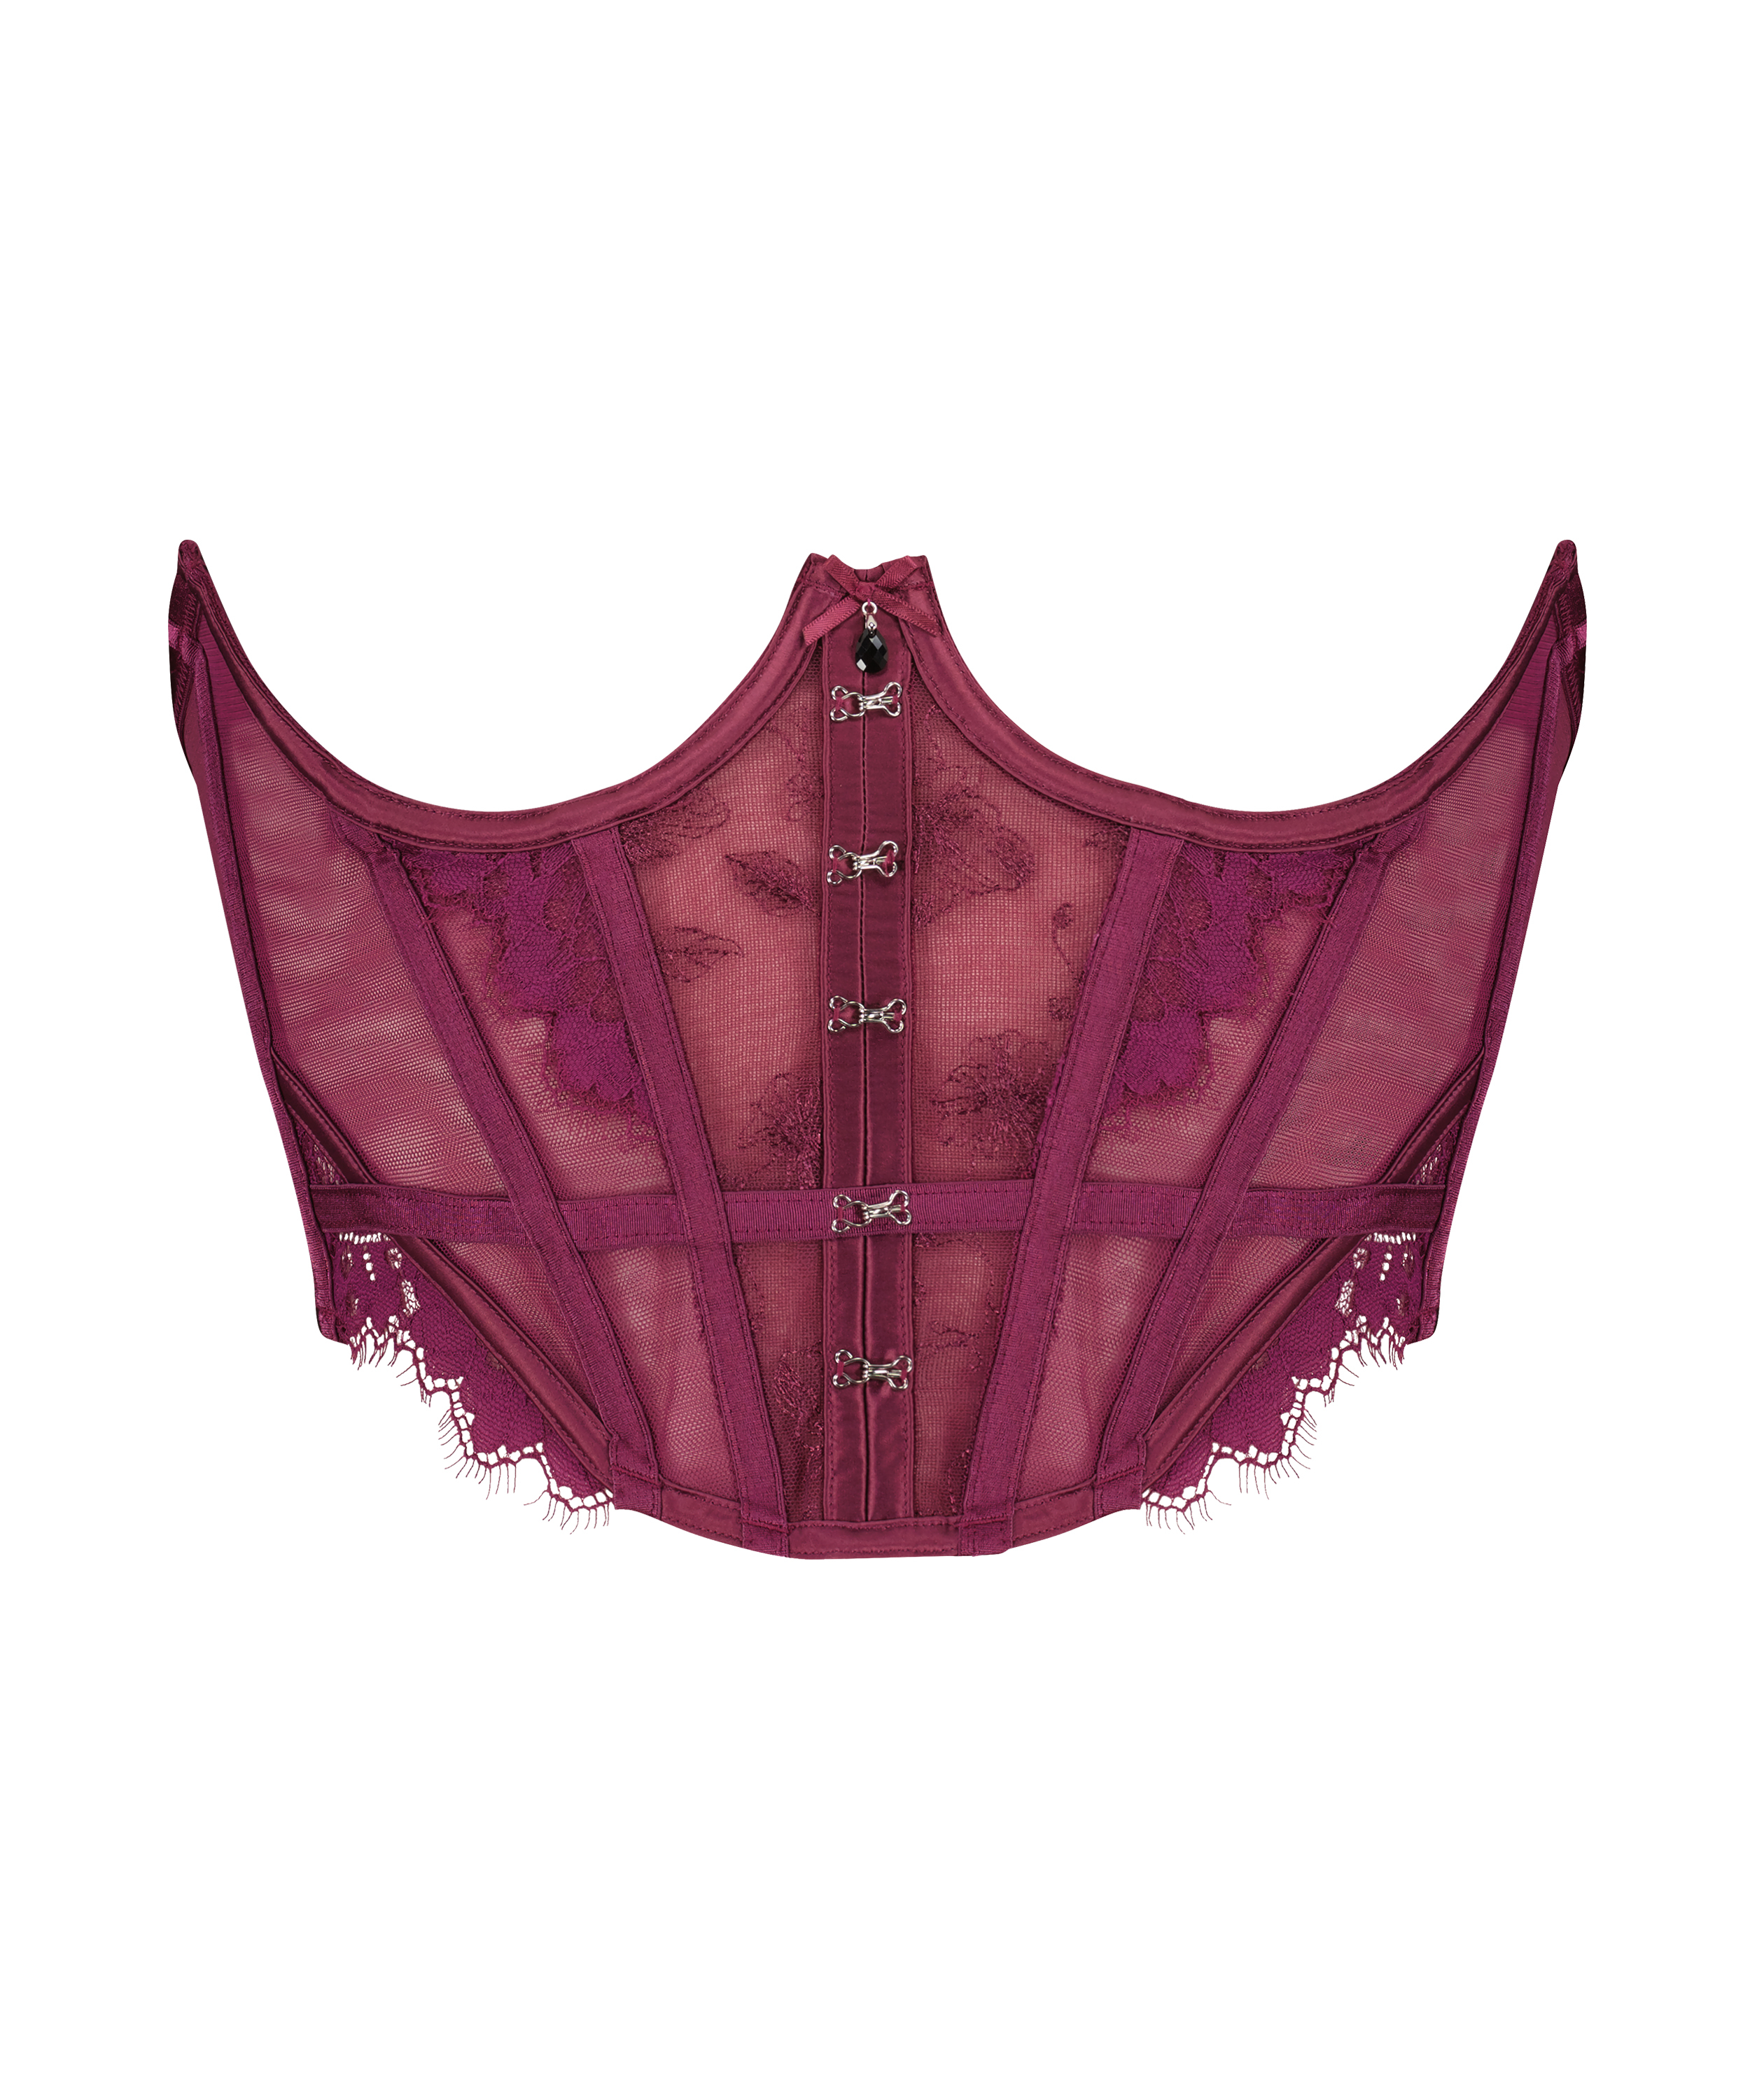 Sia Cupless Bustier - Designer Collection, Purple, main